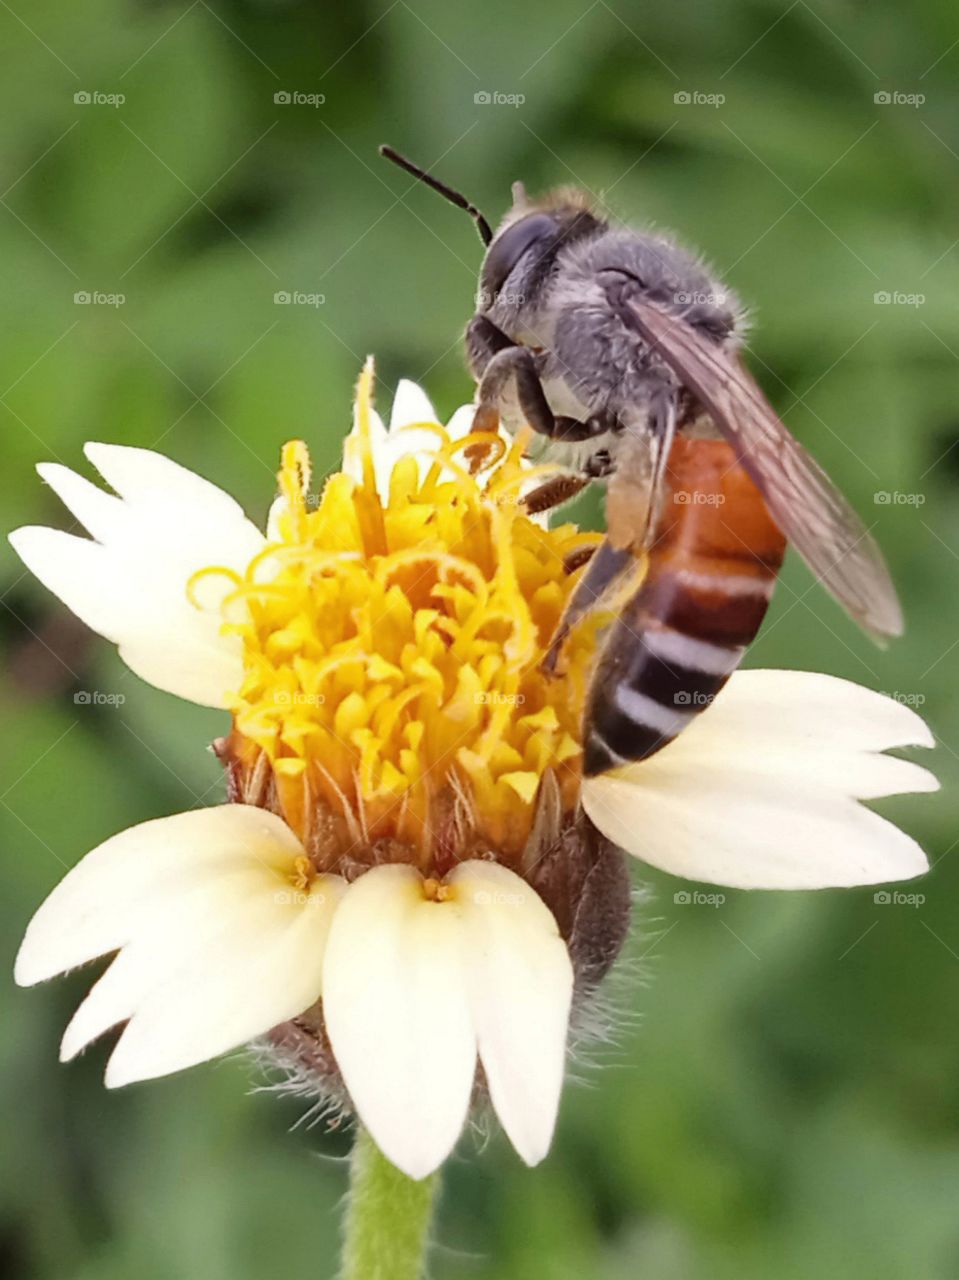 A beautiful bee collecting nectar on the flower.